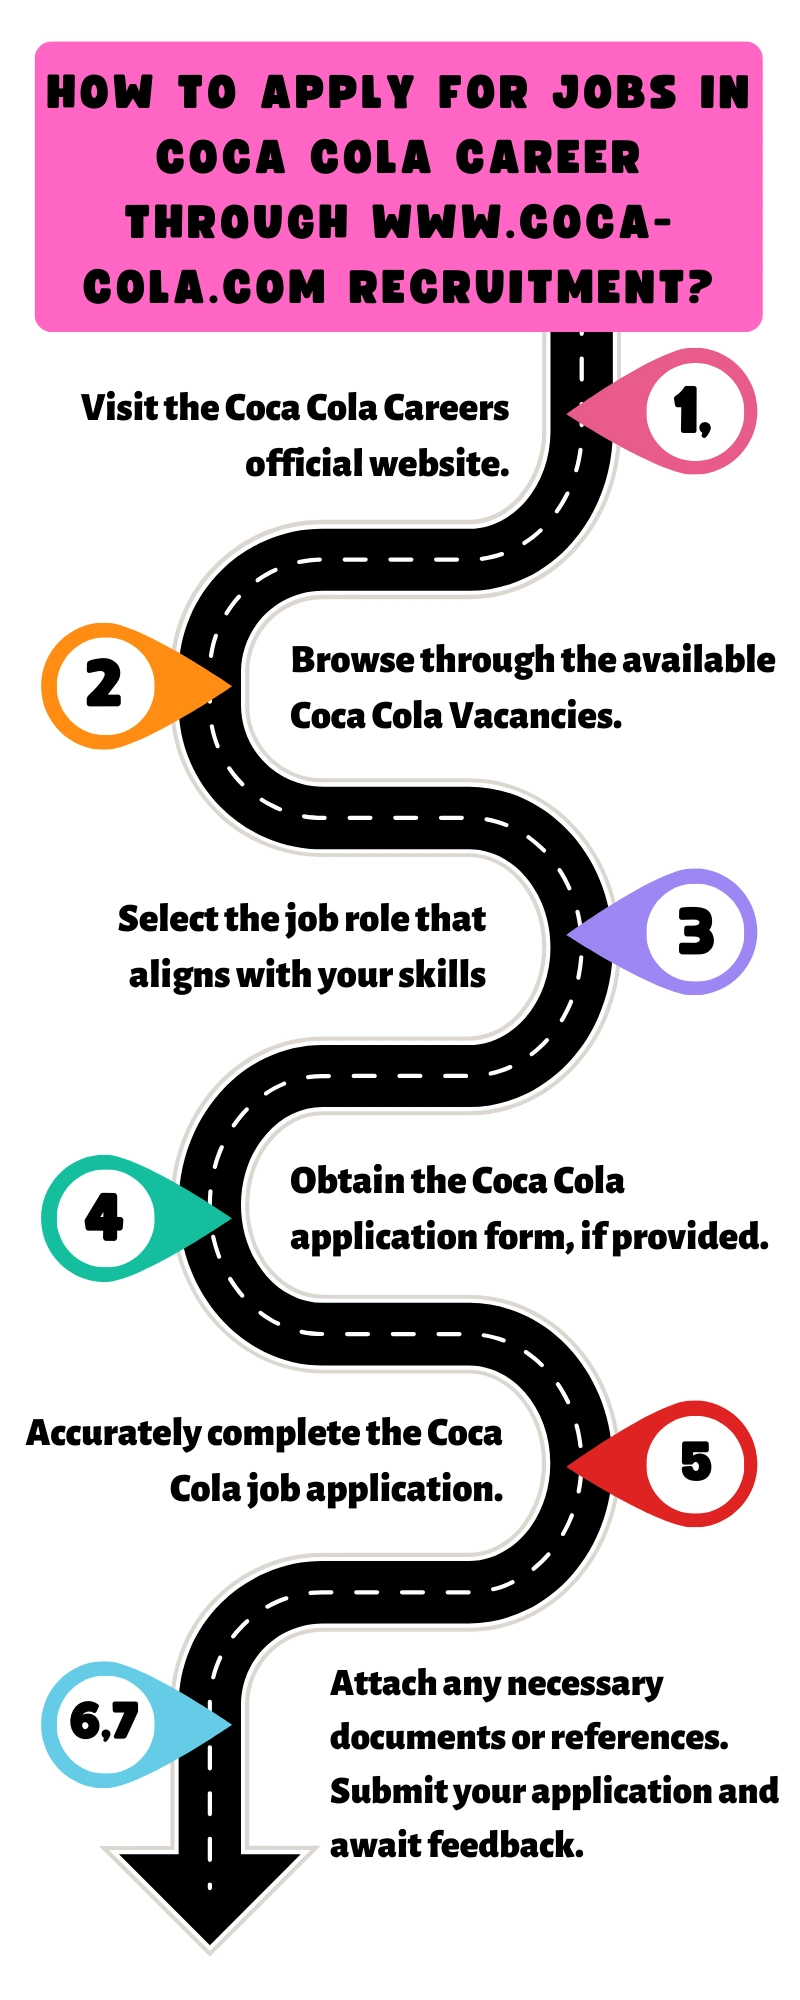 How to Apply for Jobs in Coca Cola Career through www.coca-cola.com recruitment_